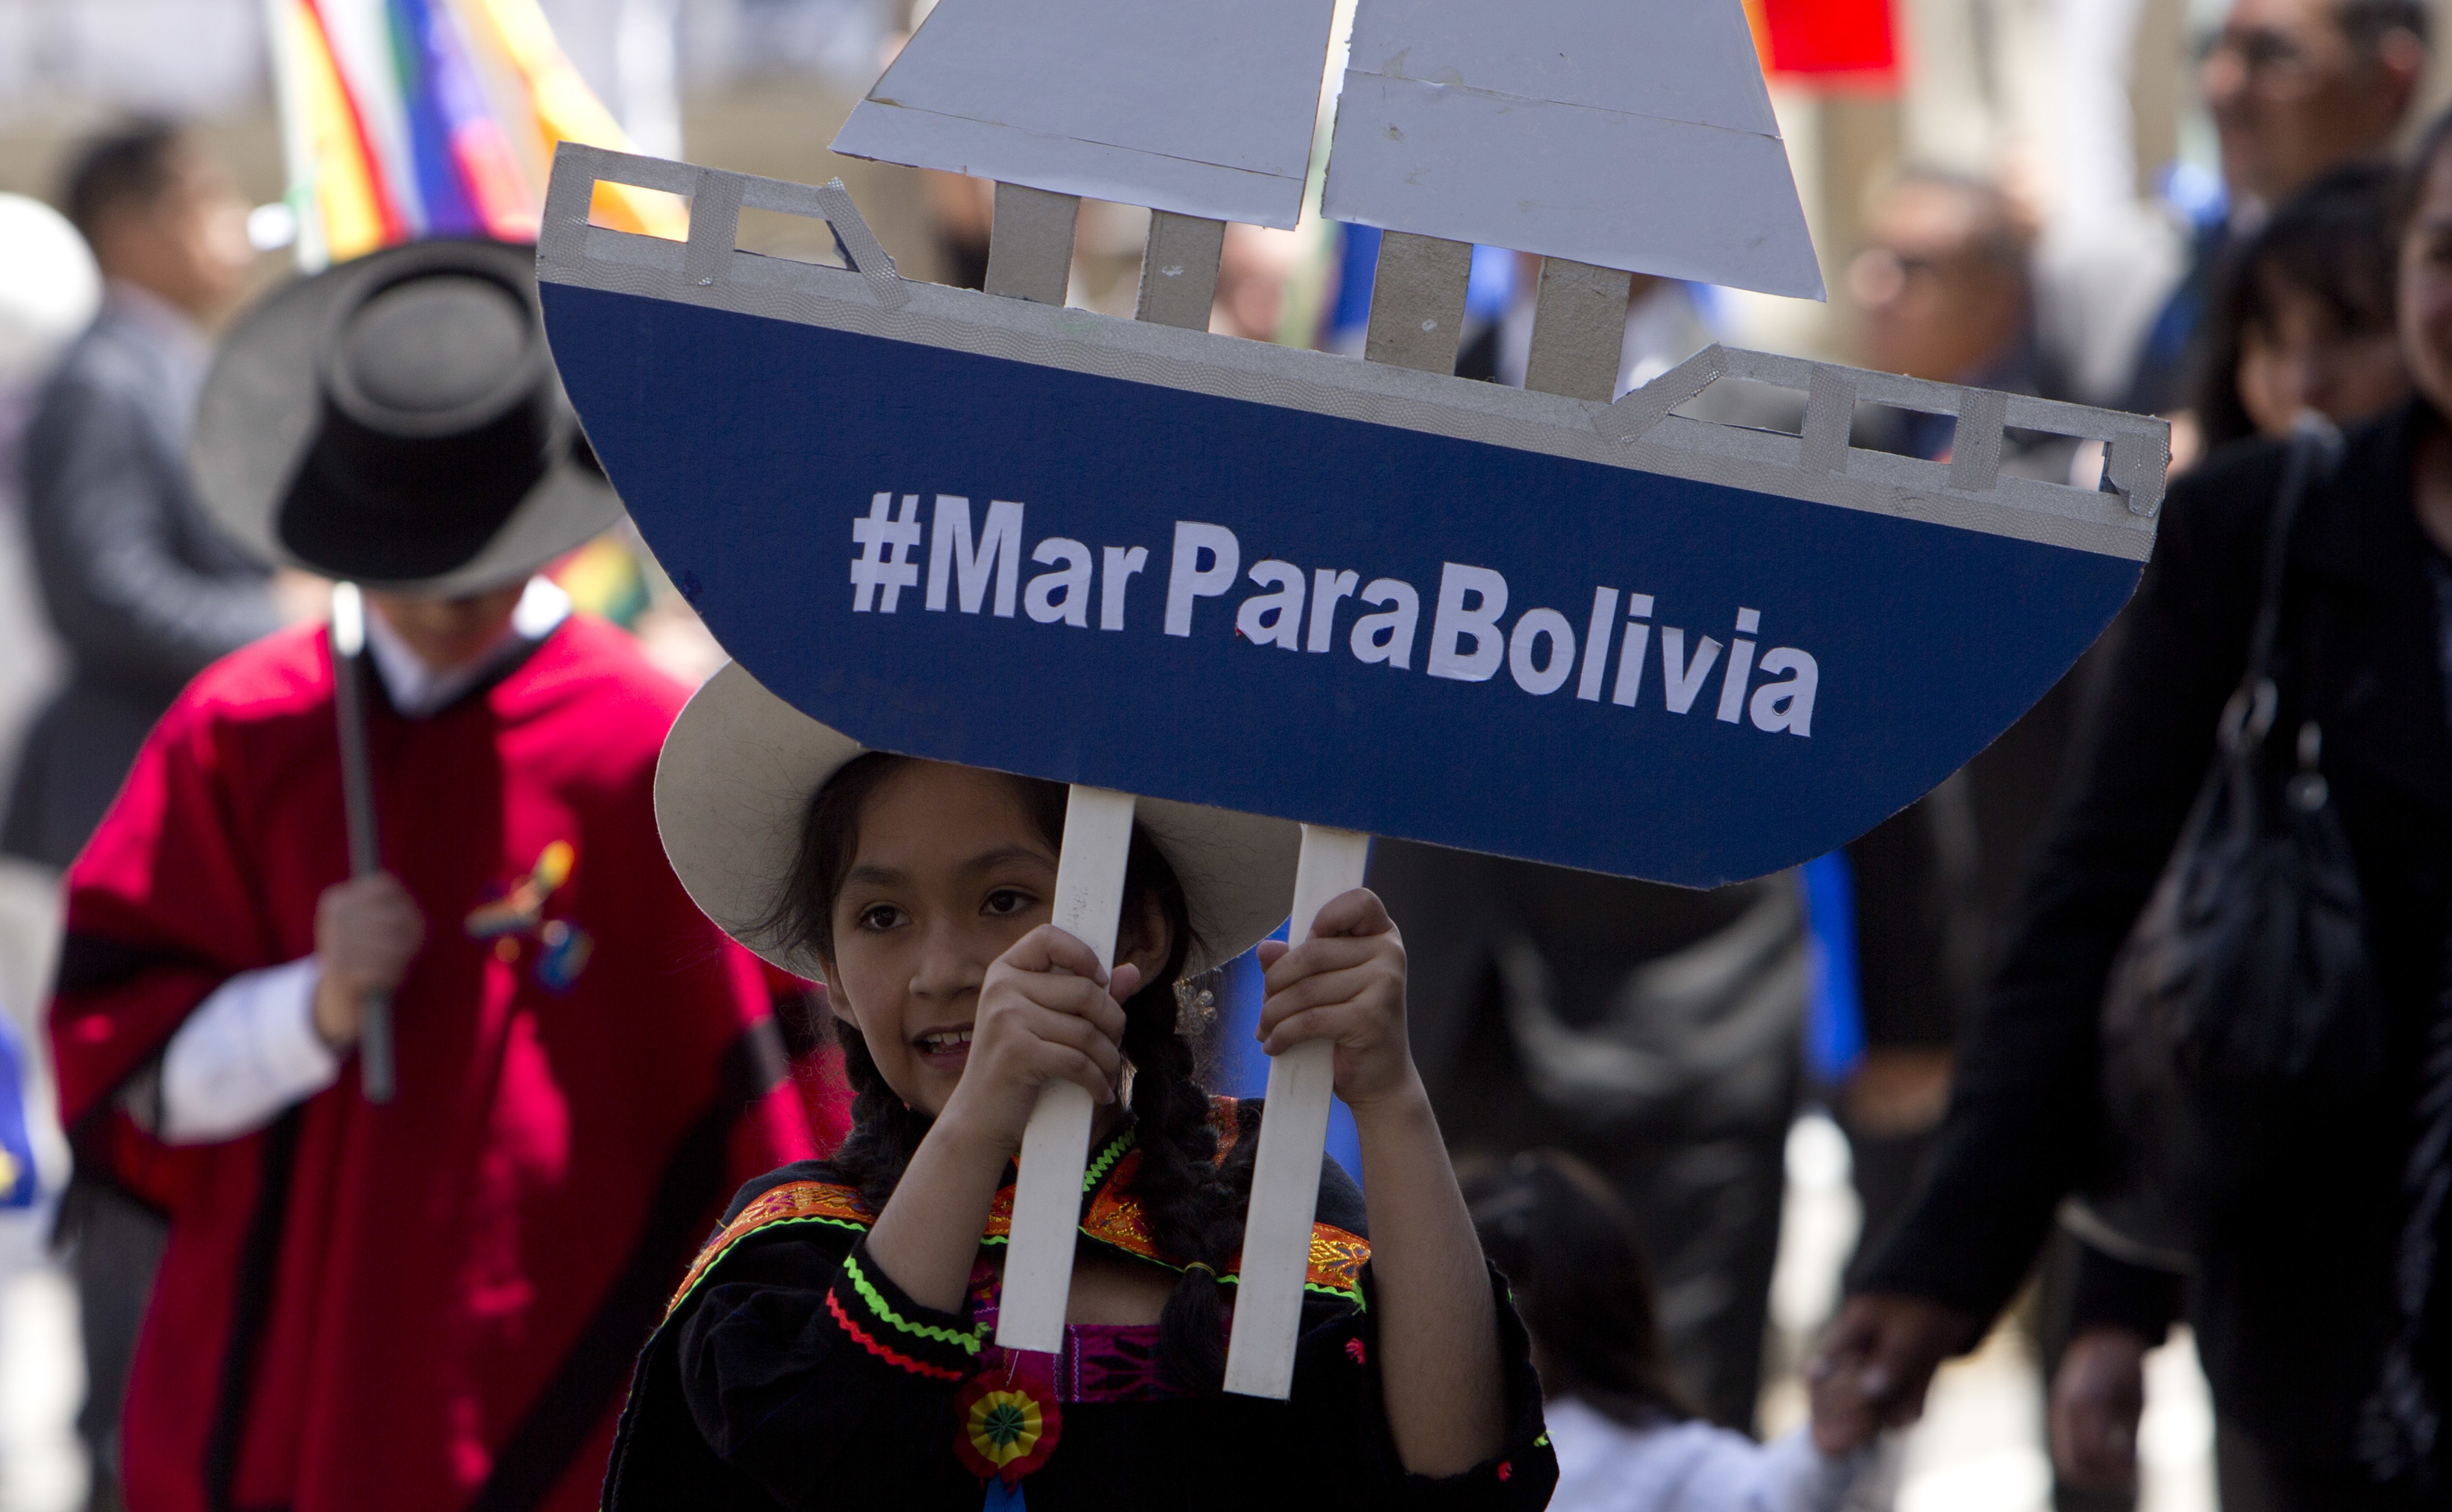 A girl holds a paper ship and signs that reads in Spanish "Sea for Bolivia," during an event honoring national hero Eduardo Abaroa, who died in the 1879-1884 War of the Pacific, during Sea Day commemorations in La Paz, Bolivia, Friday, March 23, 2018. Sea Day marks the anniversary of Bolivia losing a 19th century war with Chile, with the subsequent loss of its Pacific coastline. The International Court of Justice in The Hague is holding public hearings in the case concerning the obligation to negotiate access to the Pacific Ocean between both countries. (AP Photo/Juan Karita)